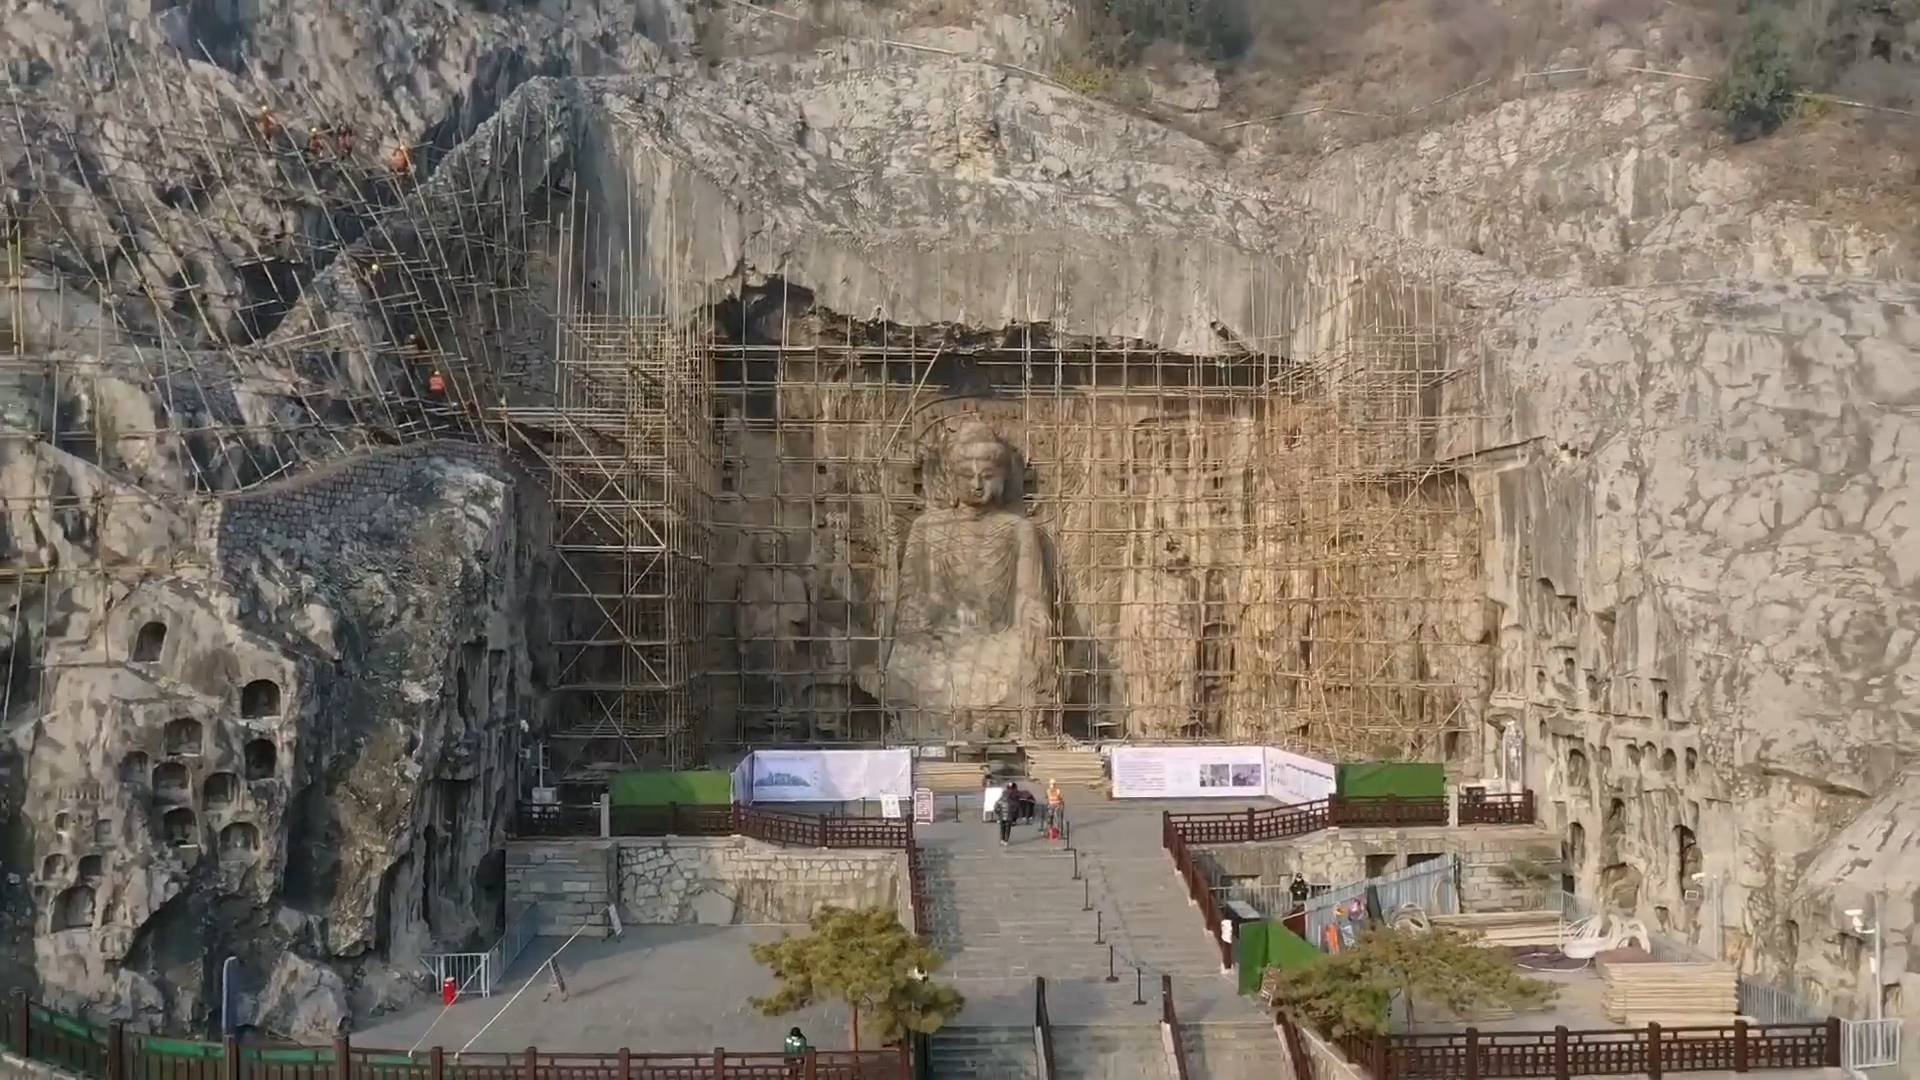 GLOBALink | Ancient temple in central China starts restoration project